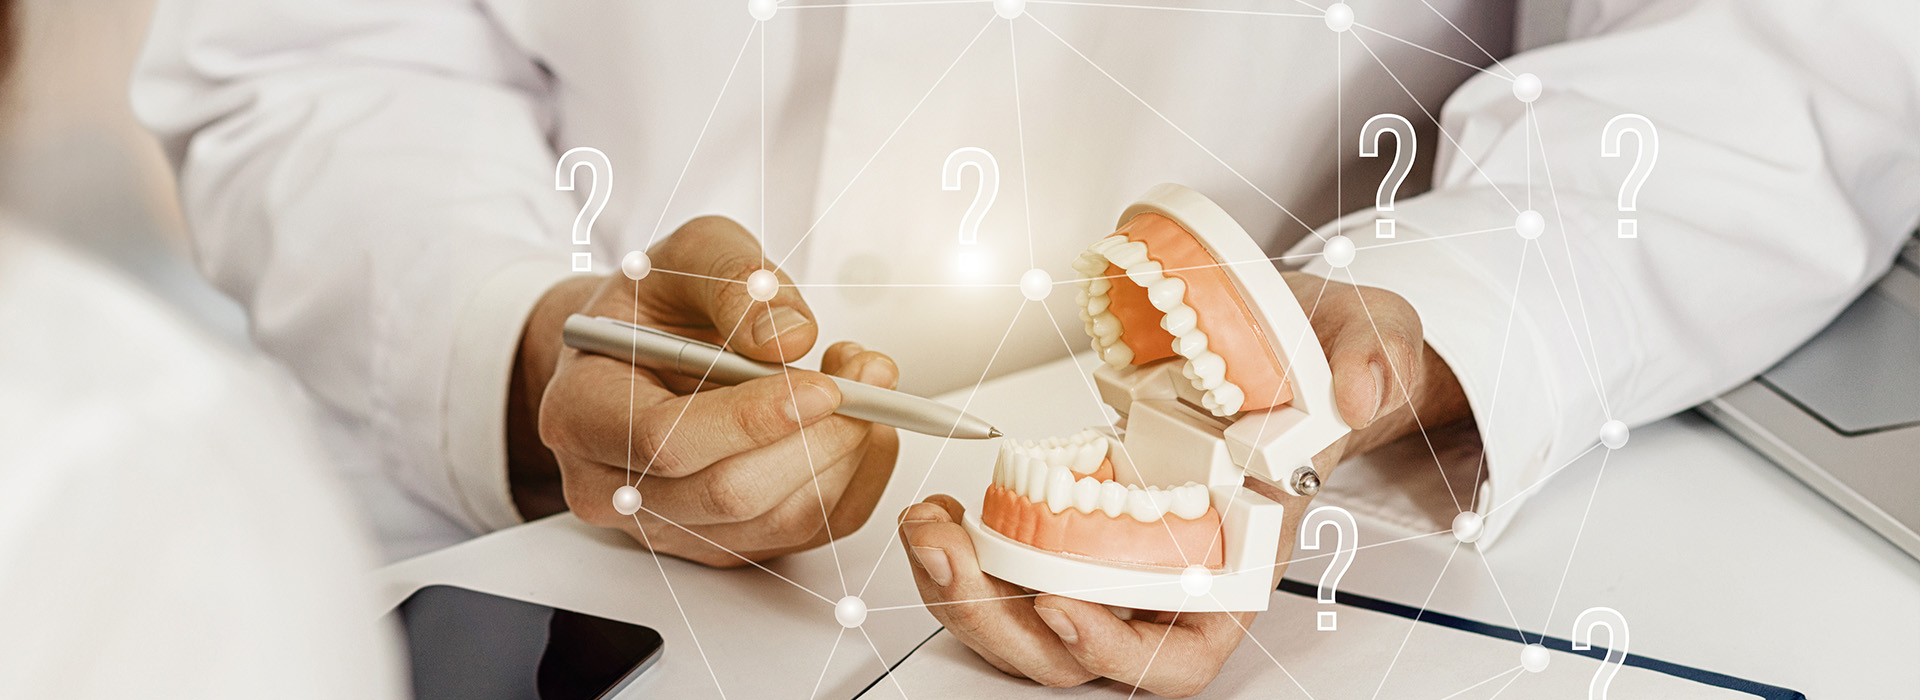 The image shows a person s hand holding a dental implant with a digital interface overlaying the scene, displaying various icons and numbers related to dental care or implants.